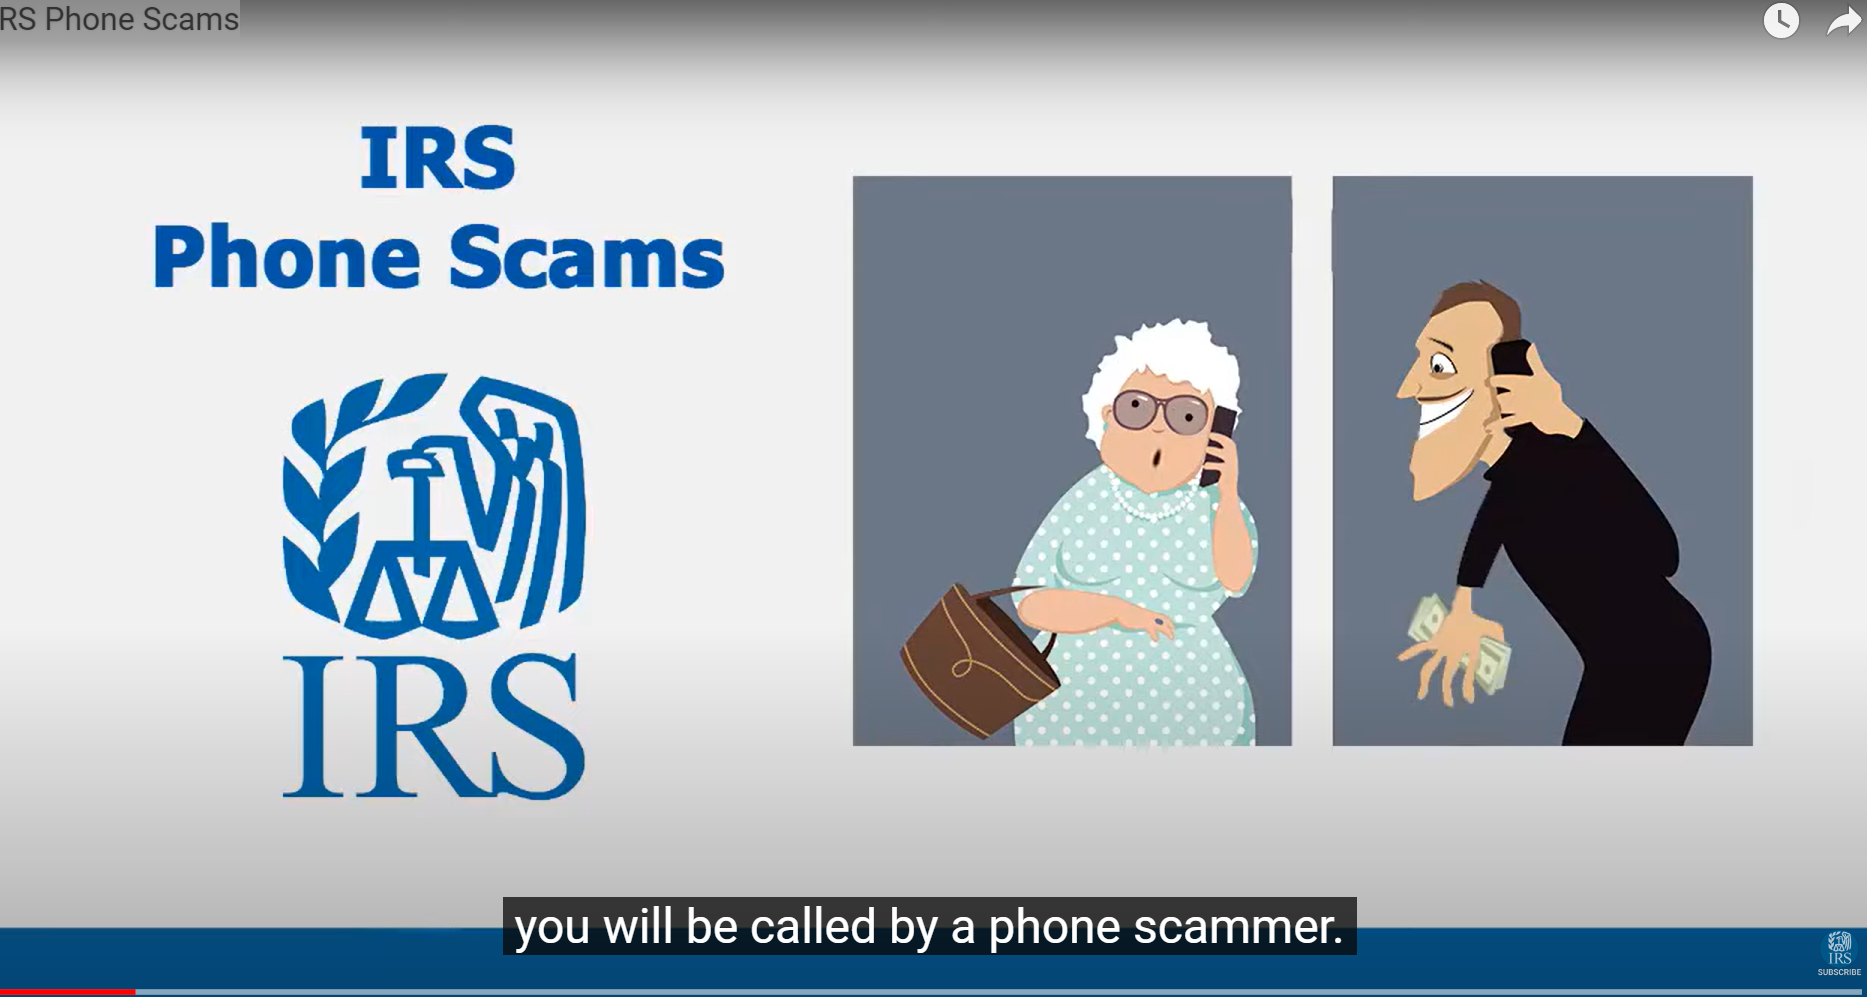 Find out how you can tell when an IRS impersonator is calling you.